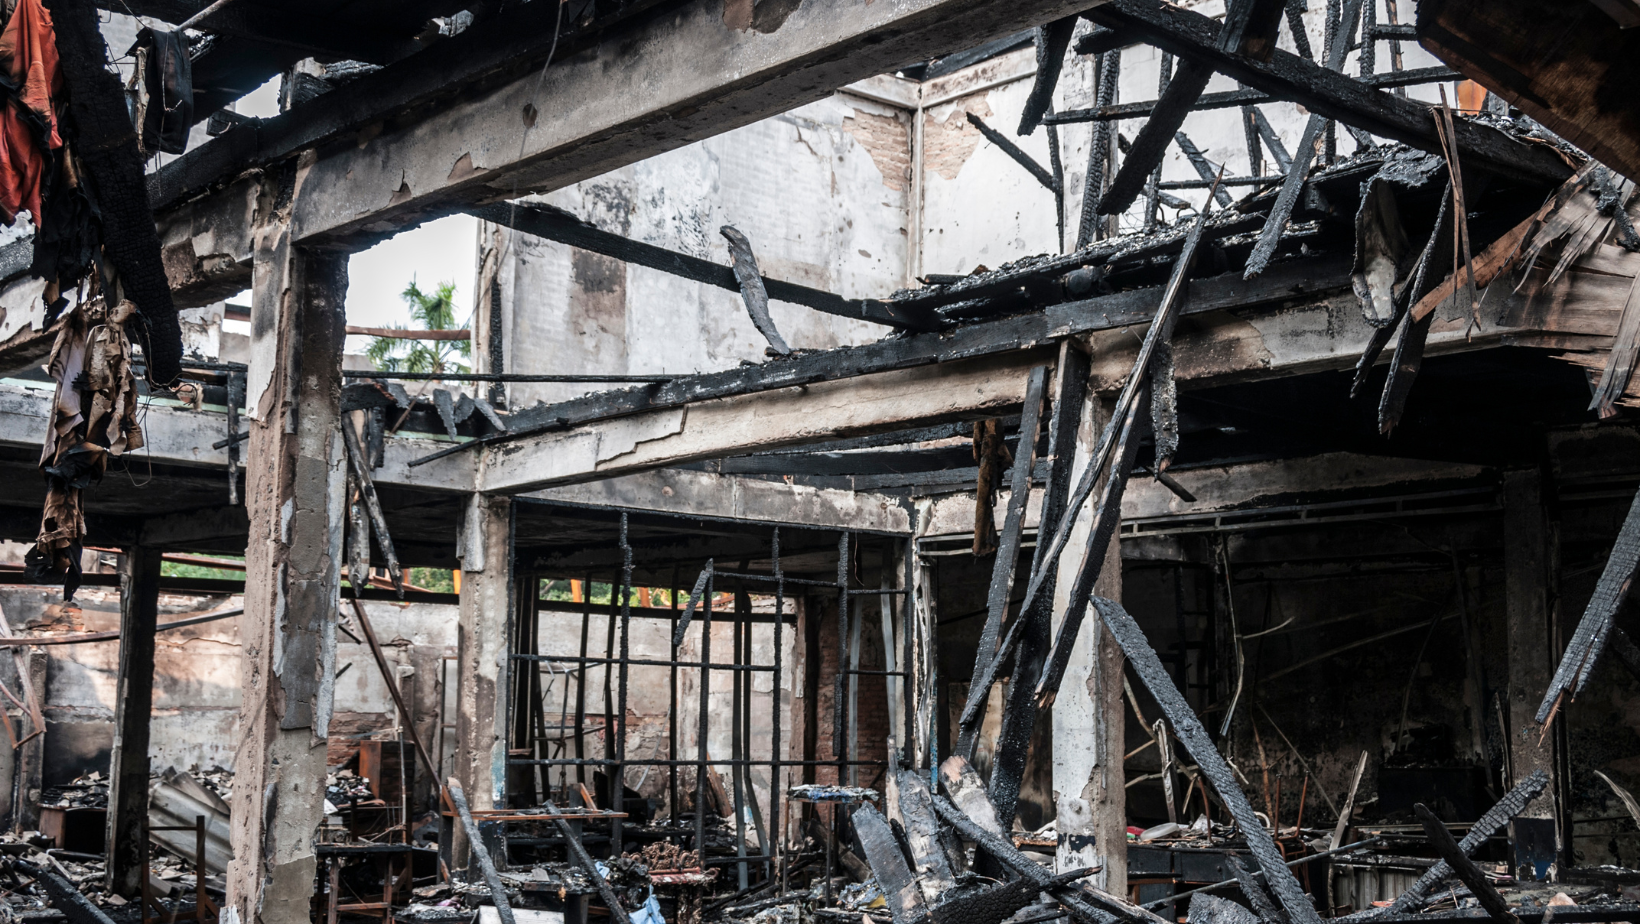 Fire Damage Dangers: Must-Know Hazards That Cause Sickness